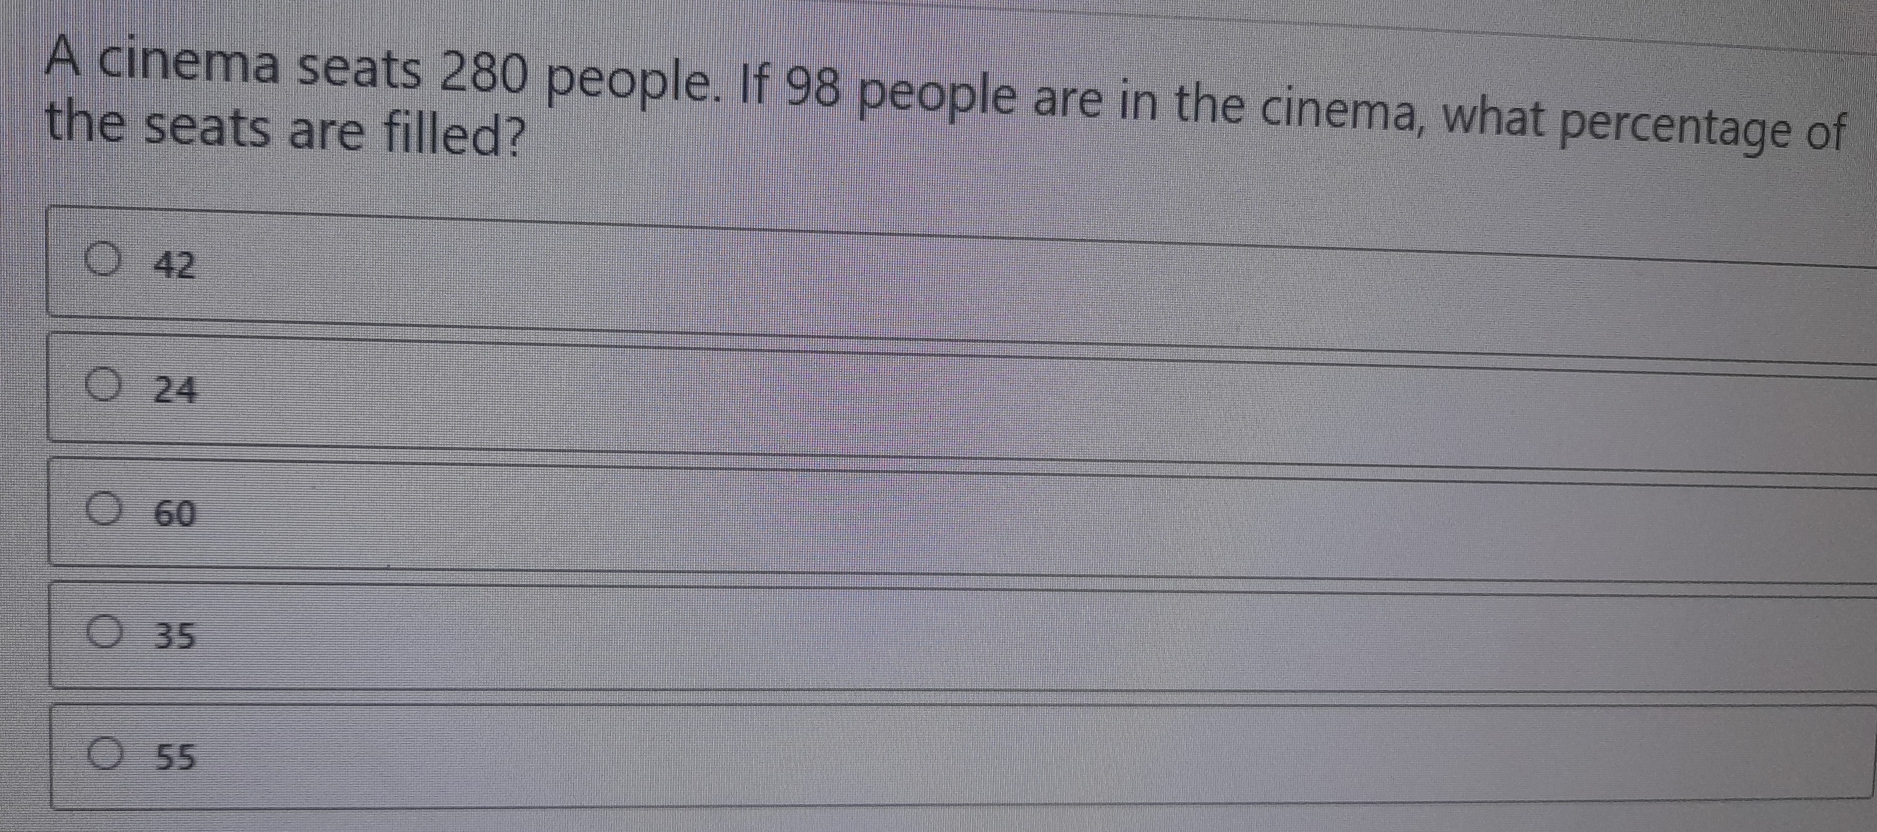 A cinema seats 280 people. If 98 people are in the cinema, what percentage of the seats are filled? 42 24 60 35 55